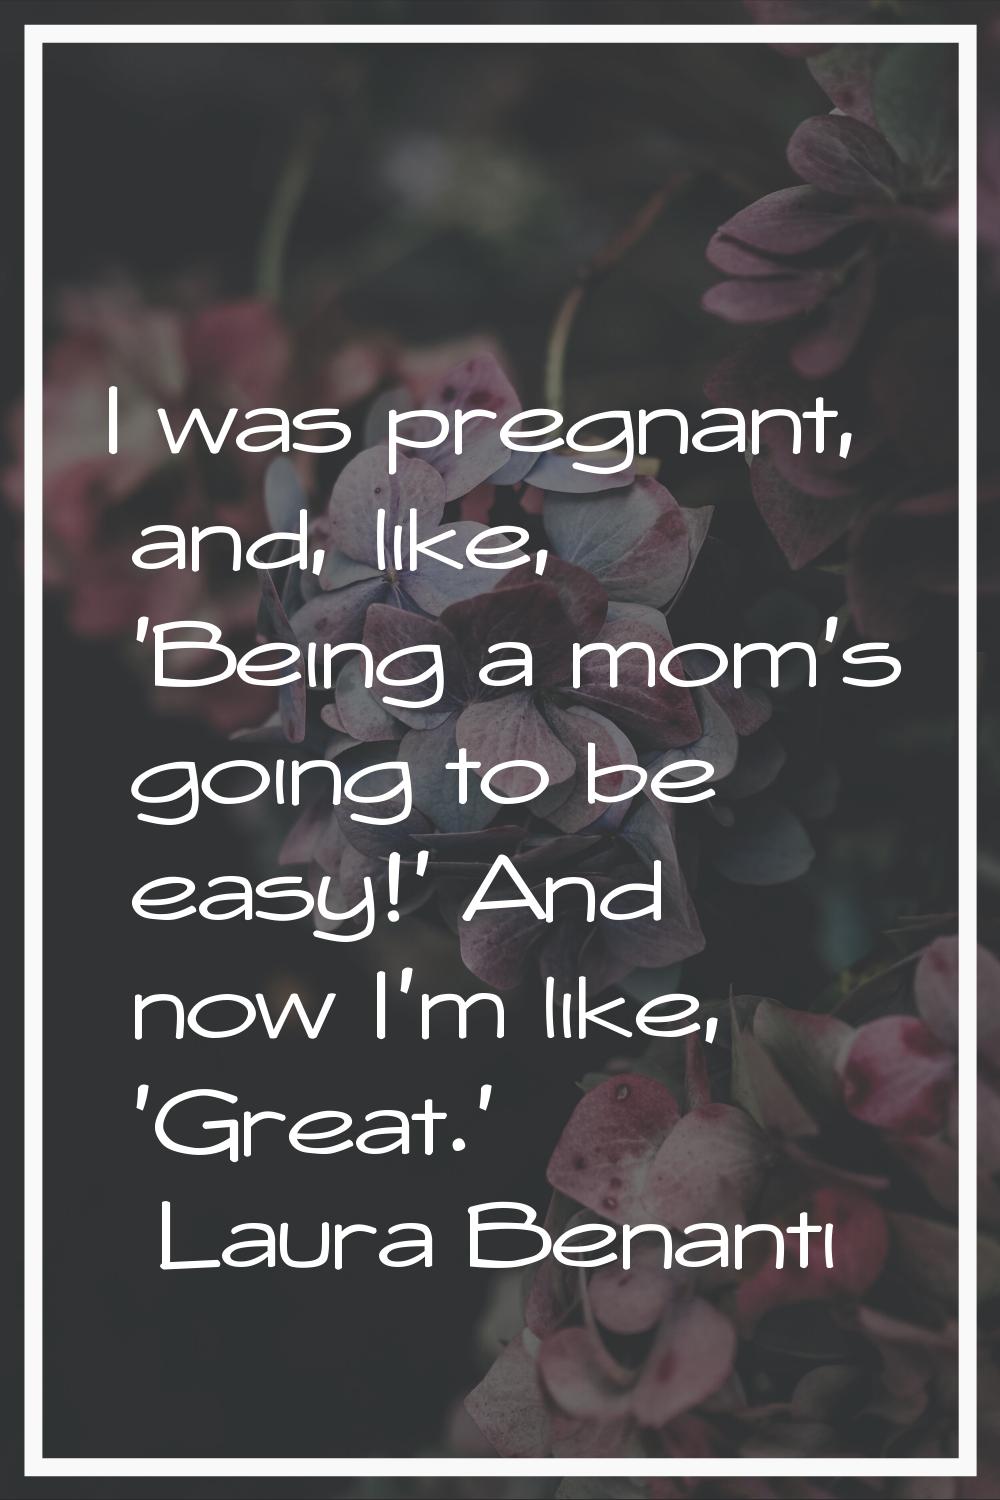 I was pregnant, and, like, 'Being a mom's going to be easy!' And now I'm like, 'Great.'